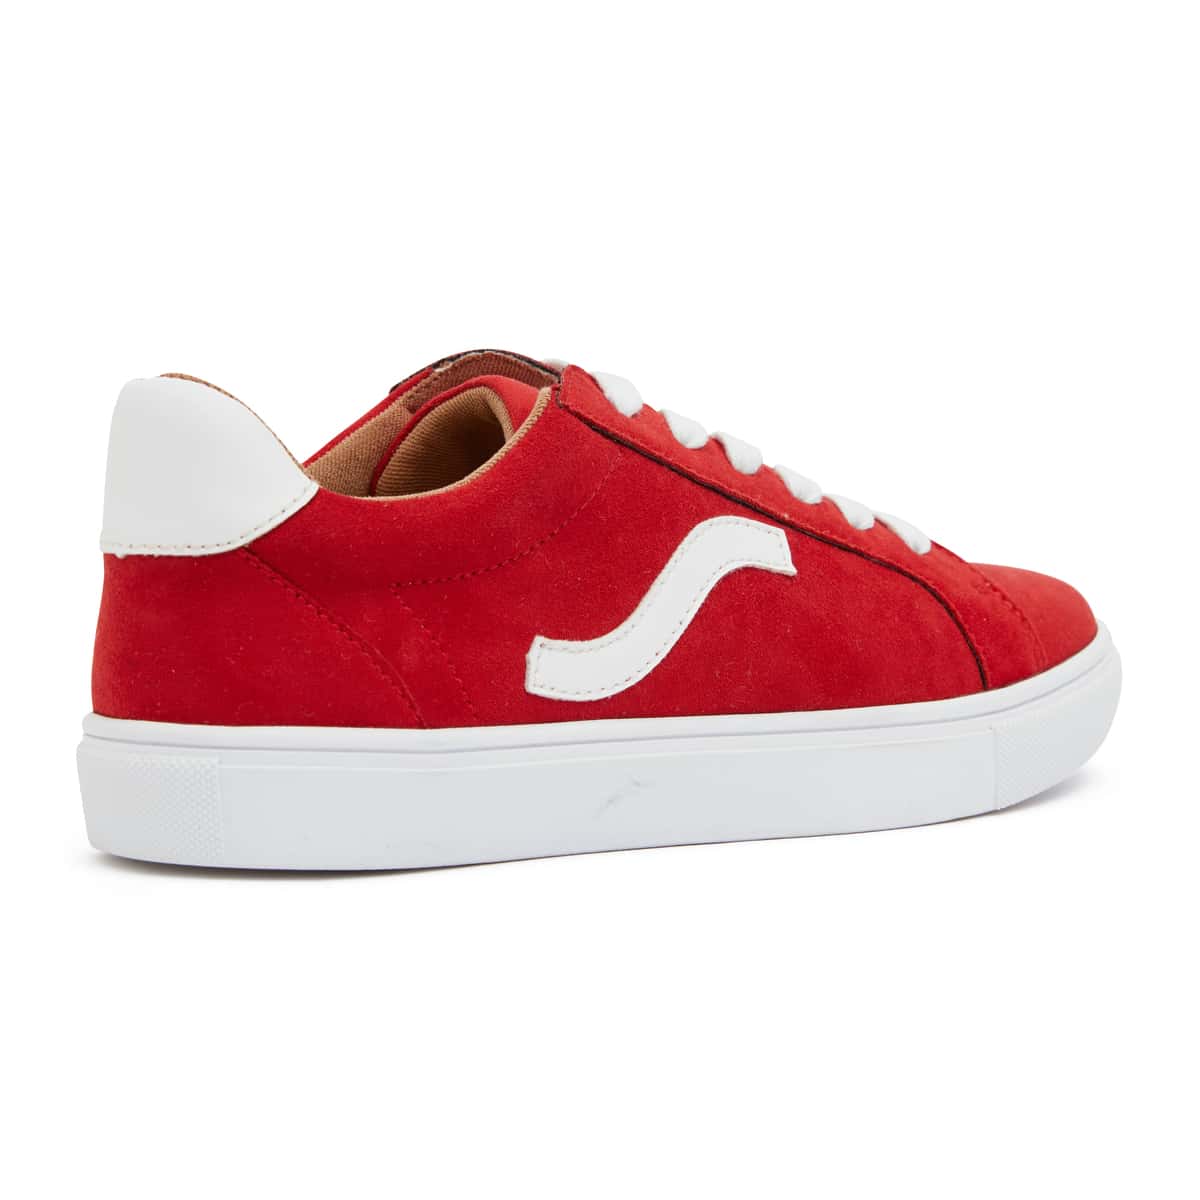 Swerve Sneaker in Red Suede